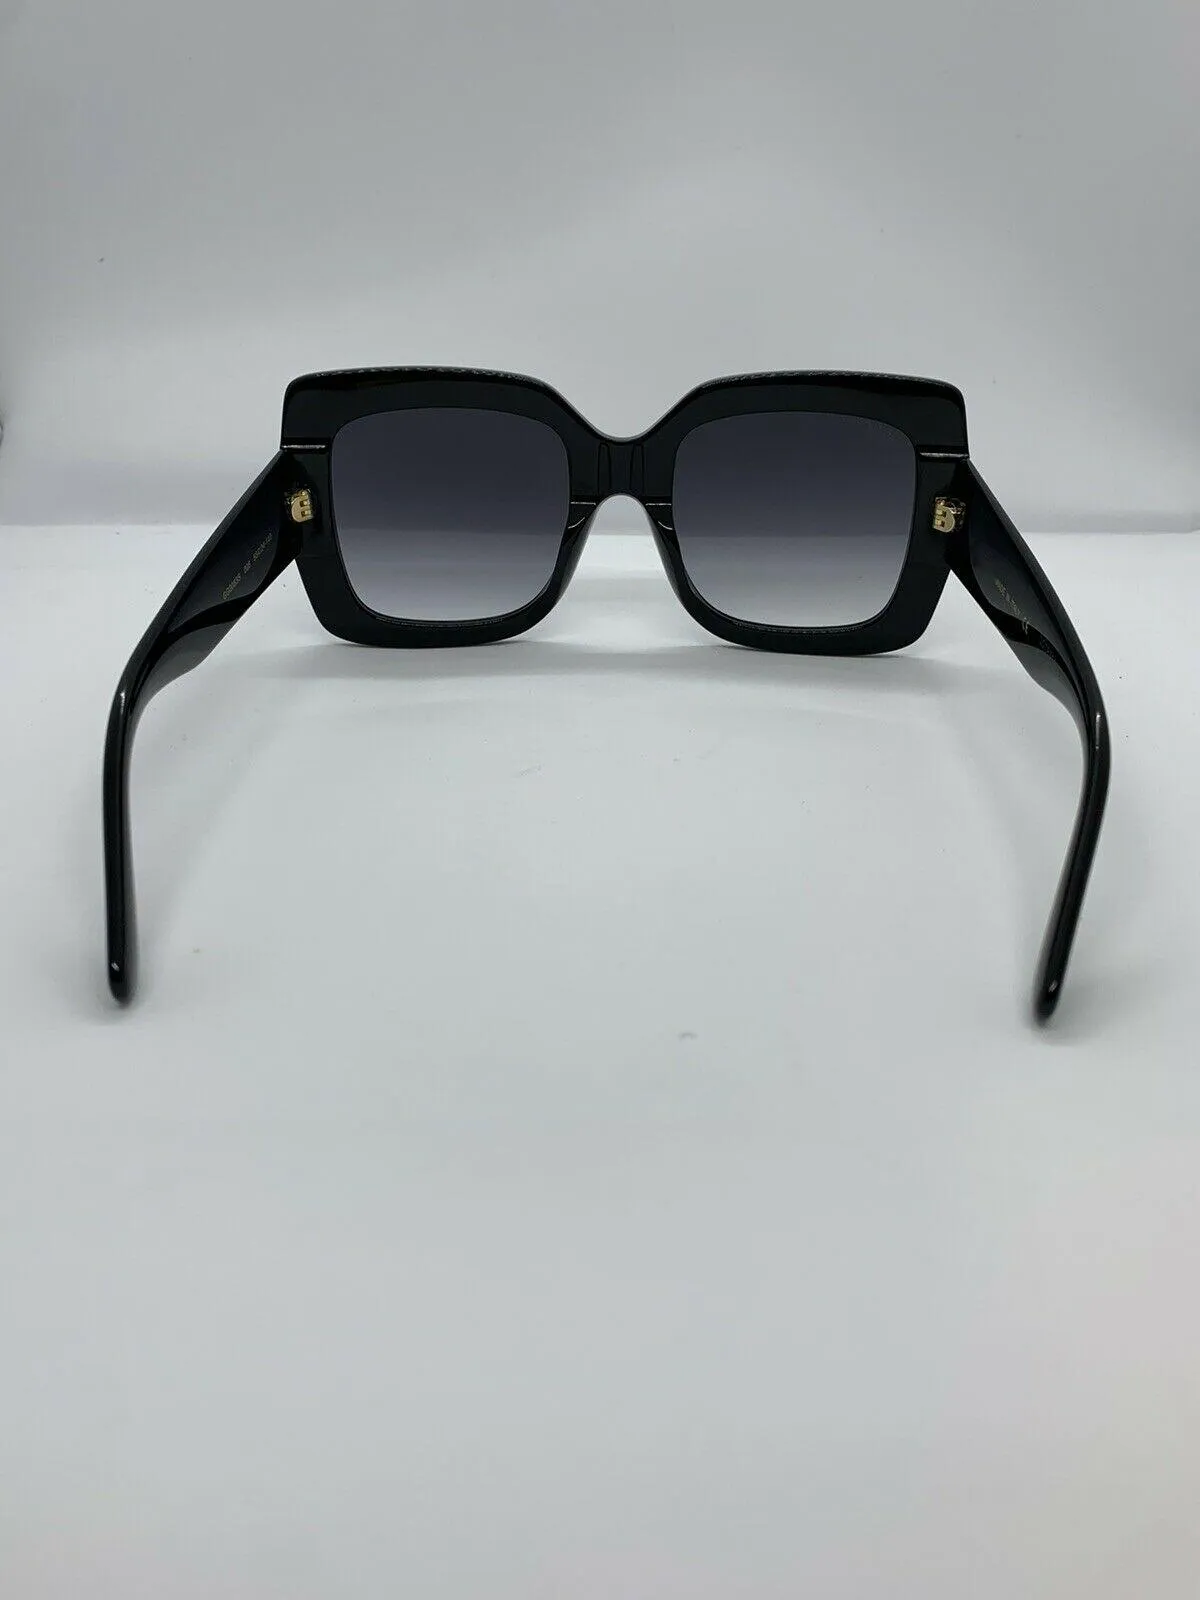 0083S Black Oversized Square Grey Lens sunglasses design sunglass UV protection 0083 55mm Womens Square Sun glasses Made in Italy 299n